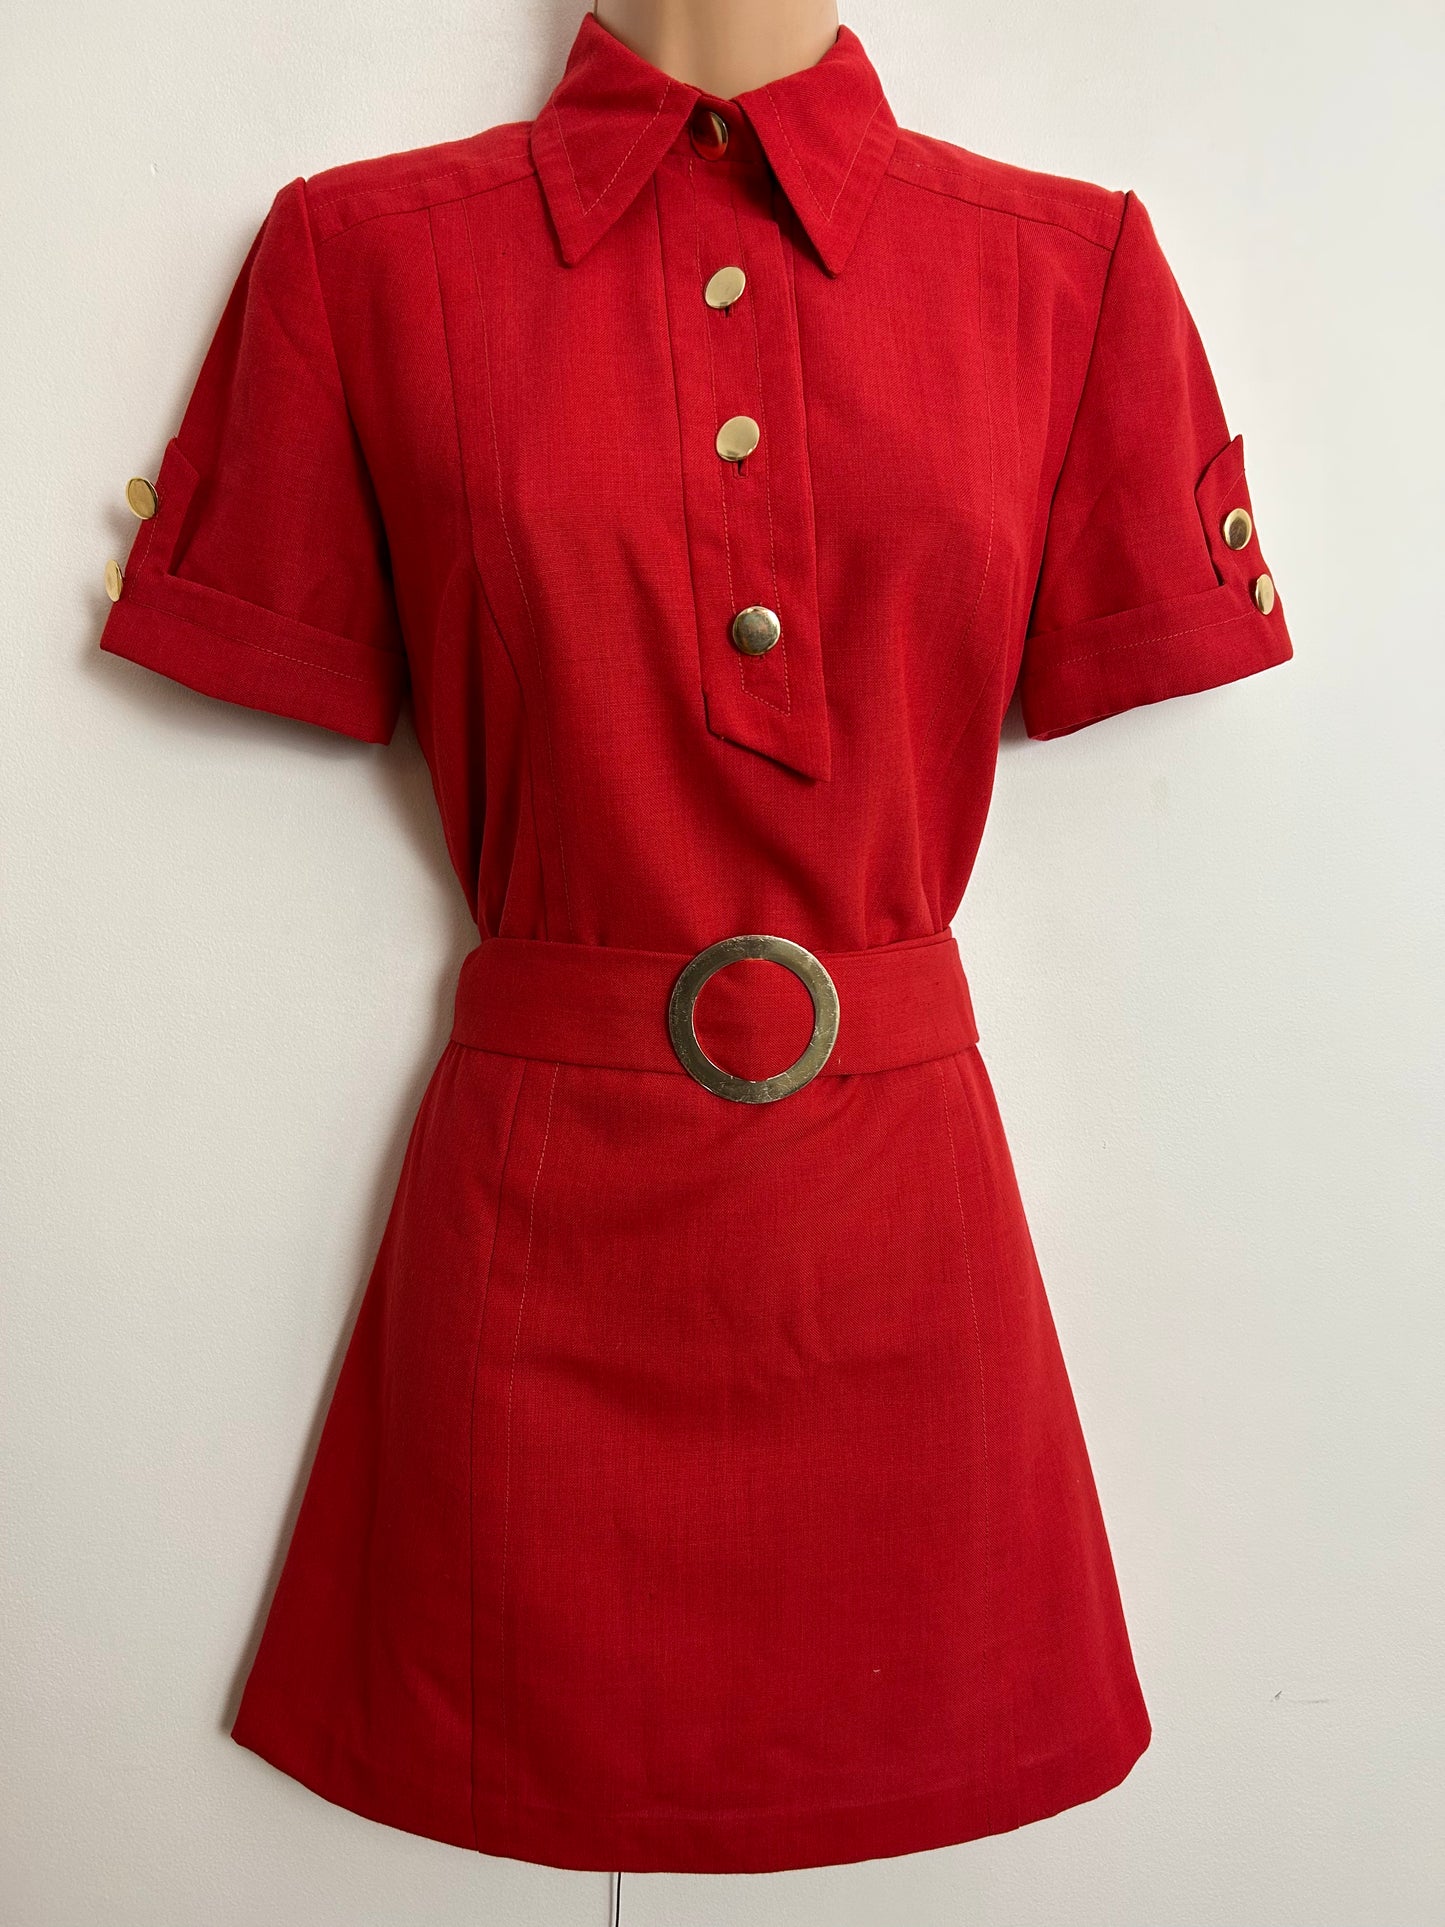 Vintage Early 1970s UK Size 8-10 Red Cotton Mix Shirt Style Belted Mini Mod Dress